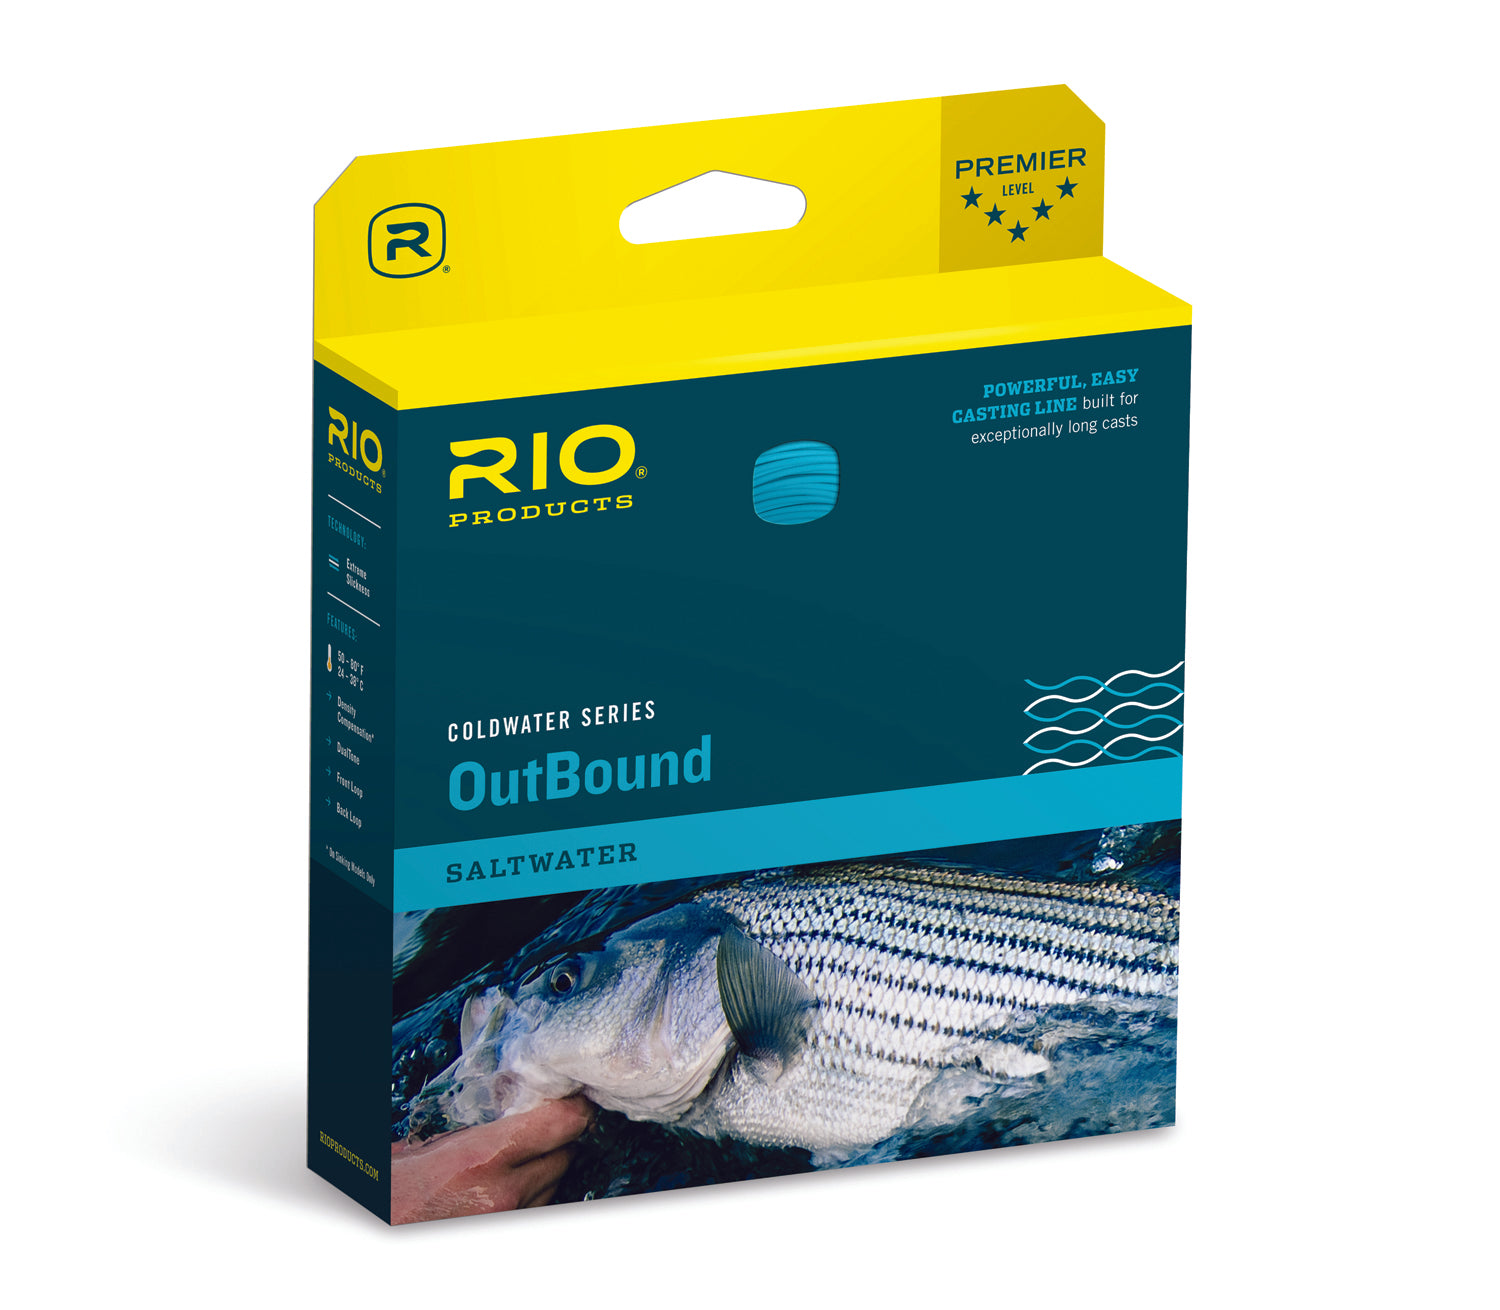 Rio Coldwater Outbound Saltwater - Rivers & Glen Trading Co.